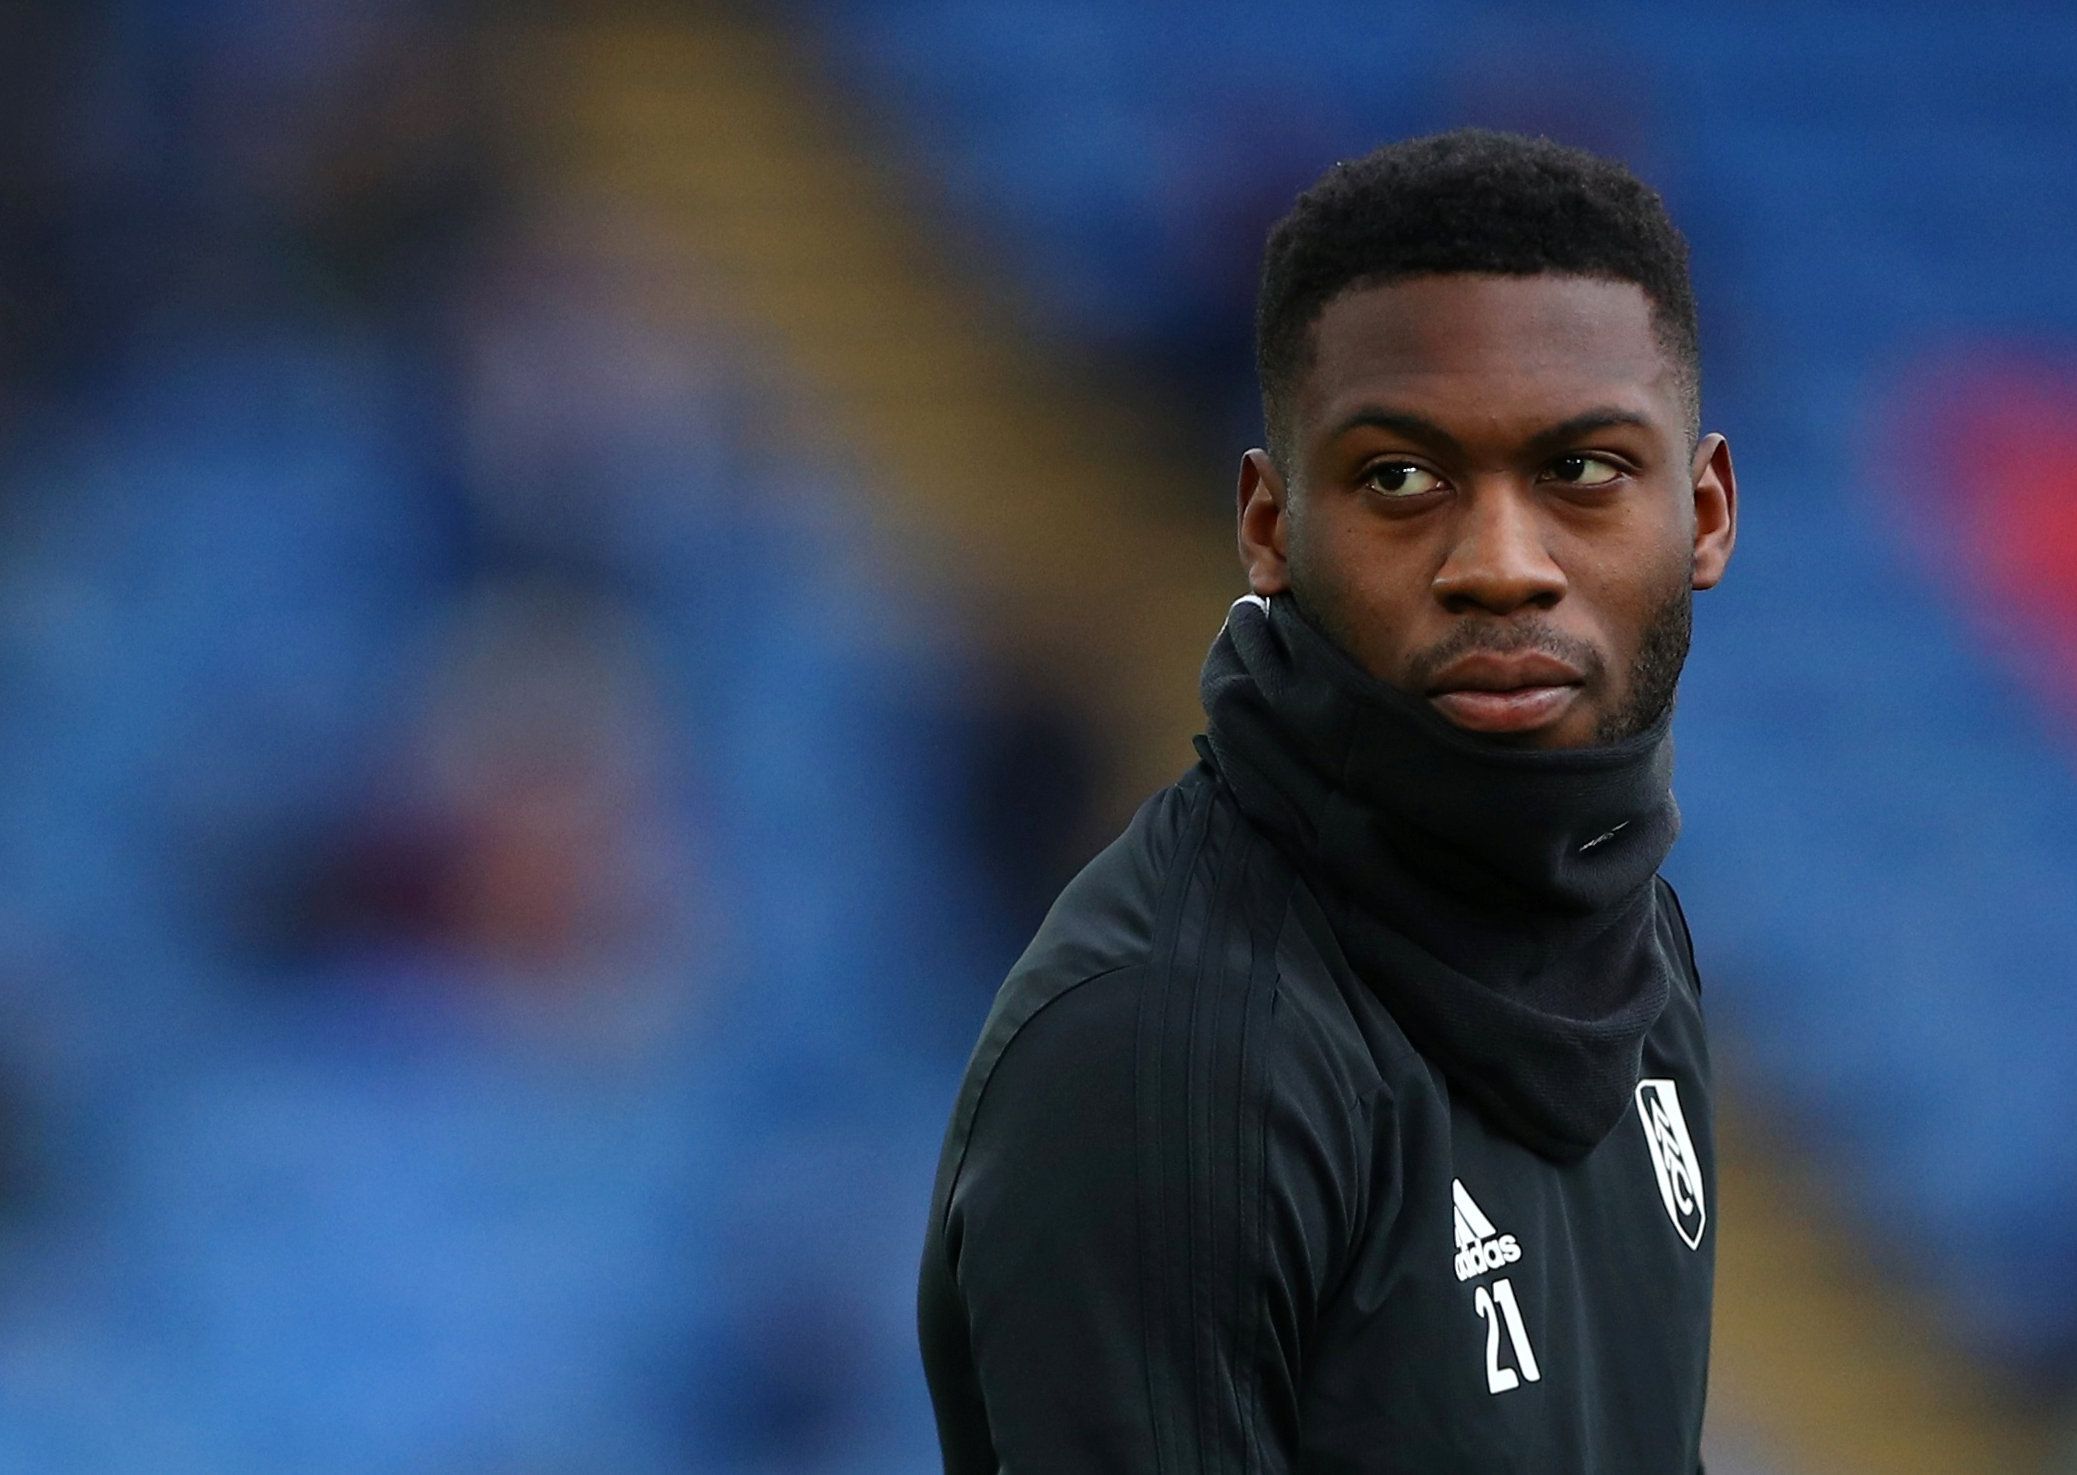 Soccer Football - Premier League - Crystal Palace v Fulham - Selhurst Park, London, Britain - February 2, 2019  Fulham's Timothy Fosu-Mensah during the warm up before the match   REUTERS/Hannah McKay  EDITORIAL USE ONLY. No use with unauthorized audio, video, data, fixture lists, club/league logos or 